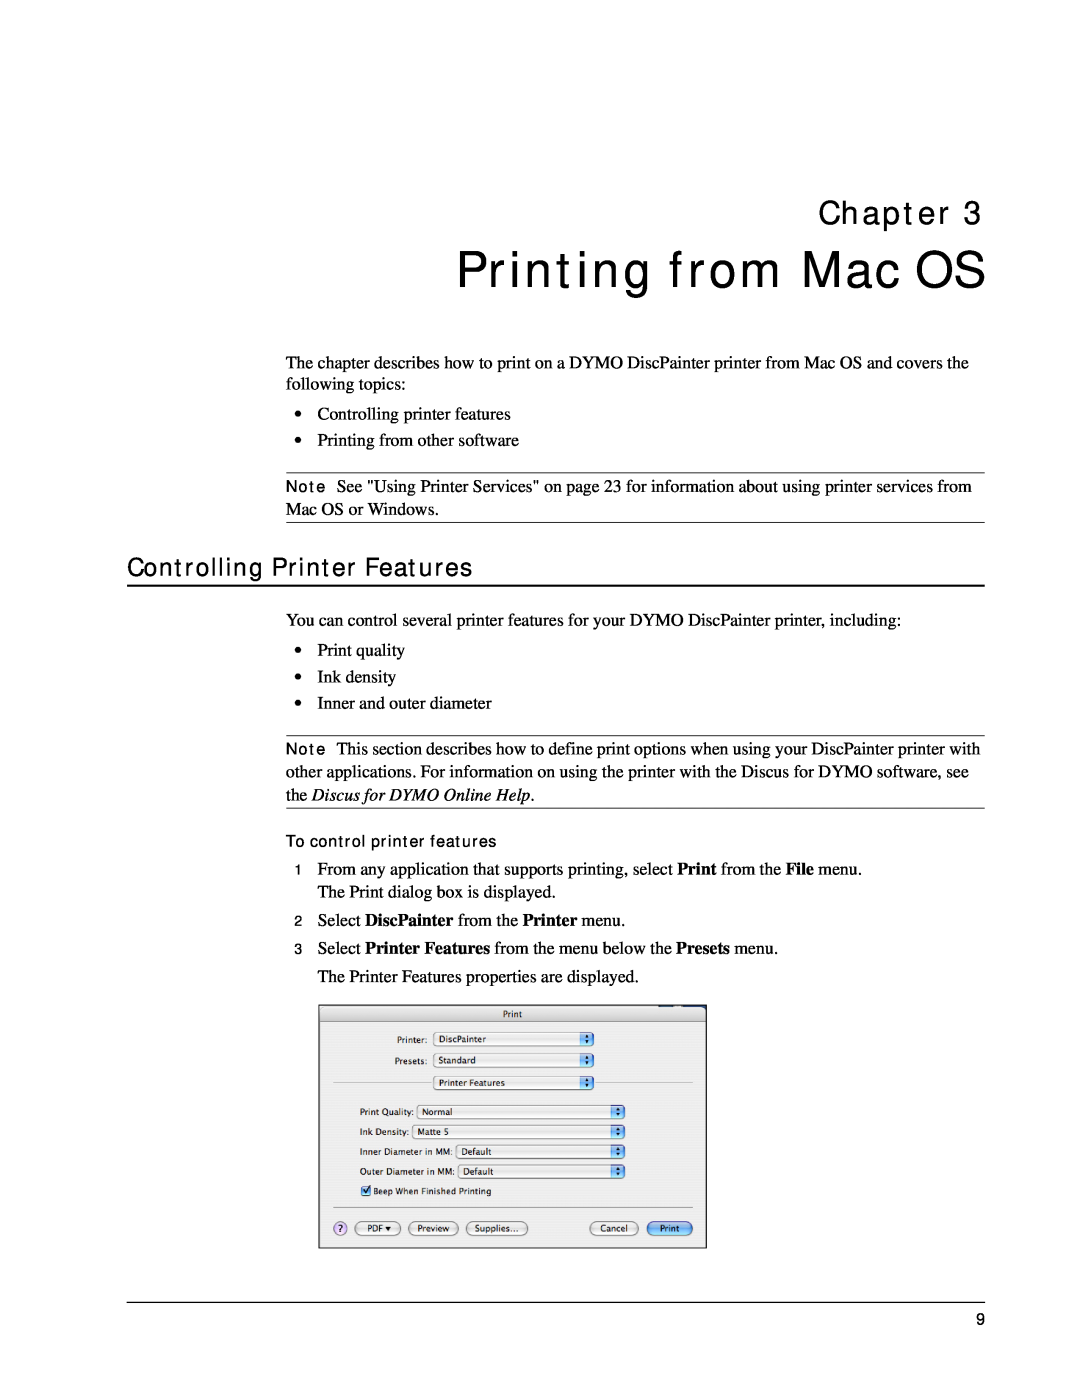 Dymo DiscPainter manual Printing from Mac OS, Controlling Printer Features, Chapter 